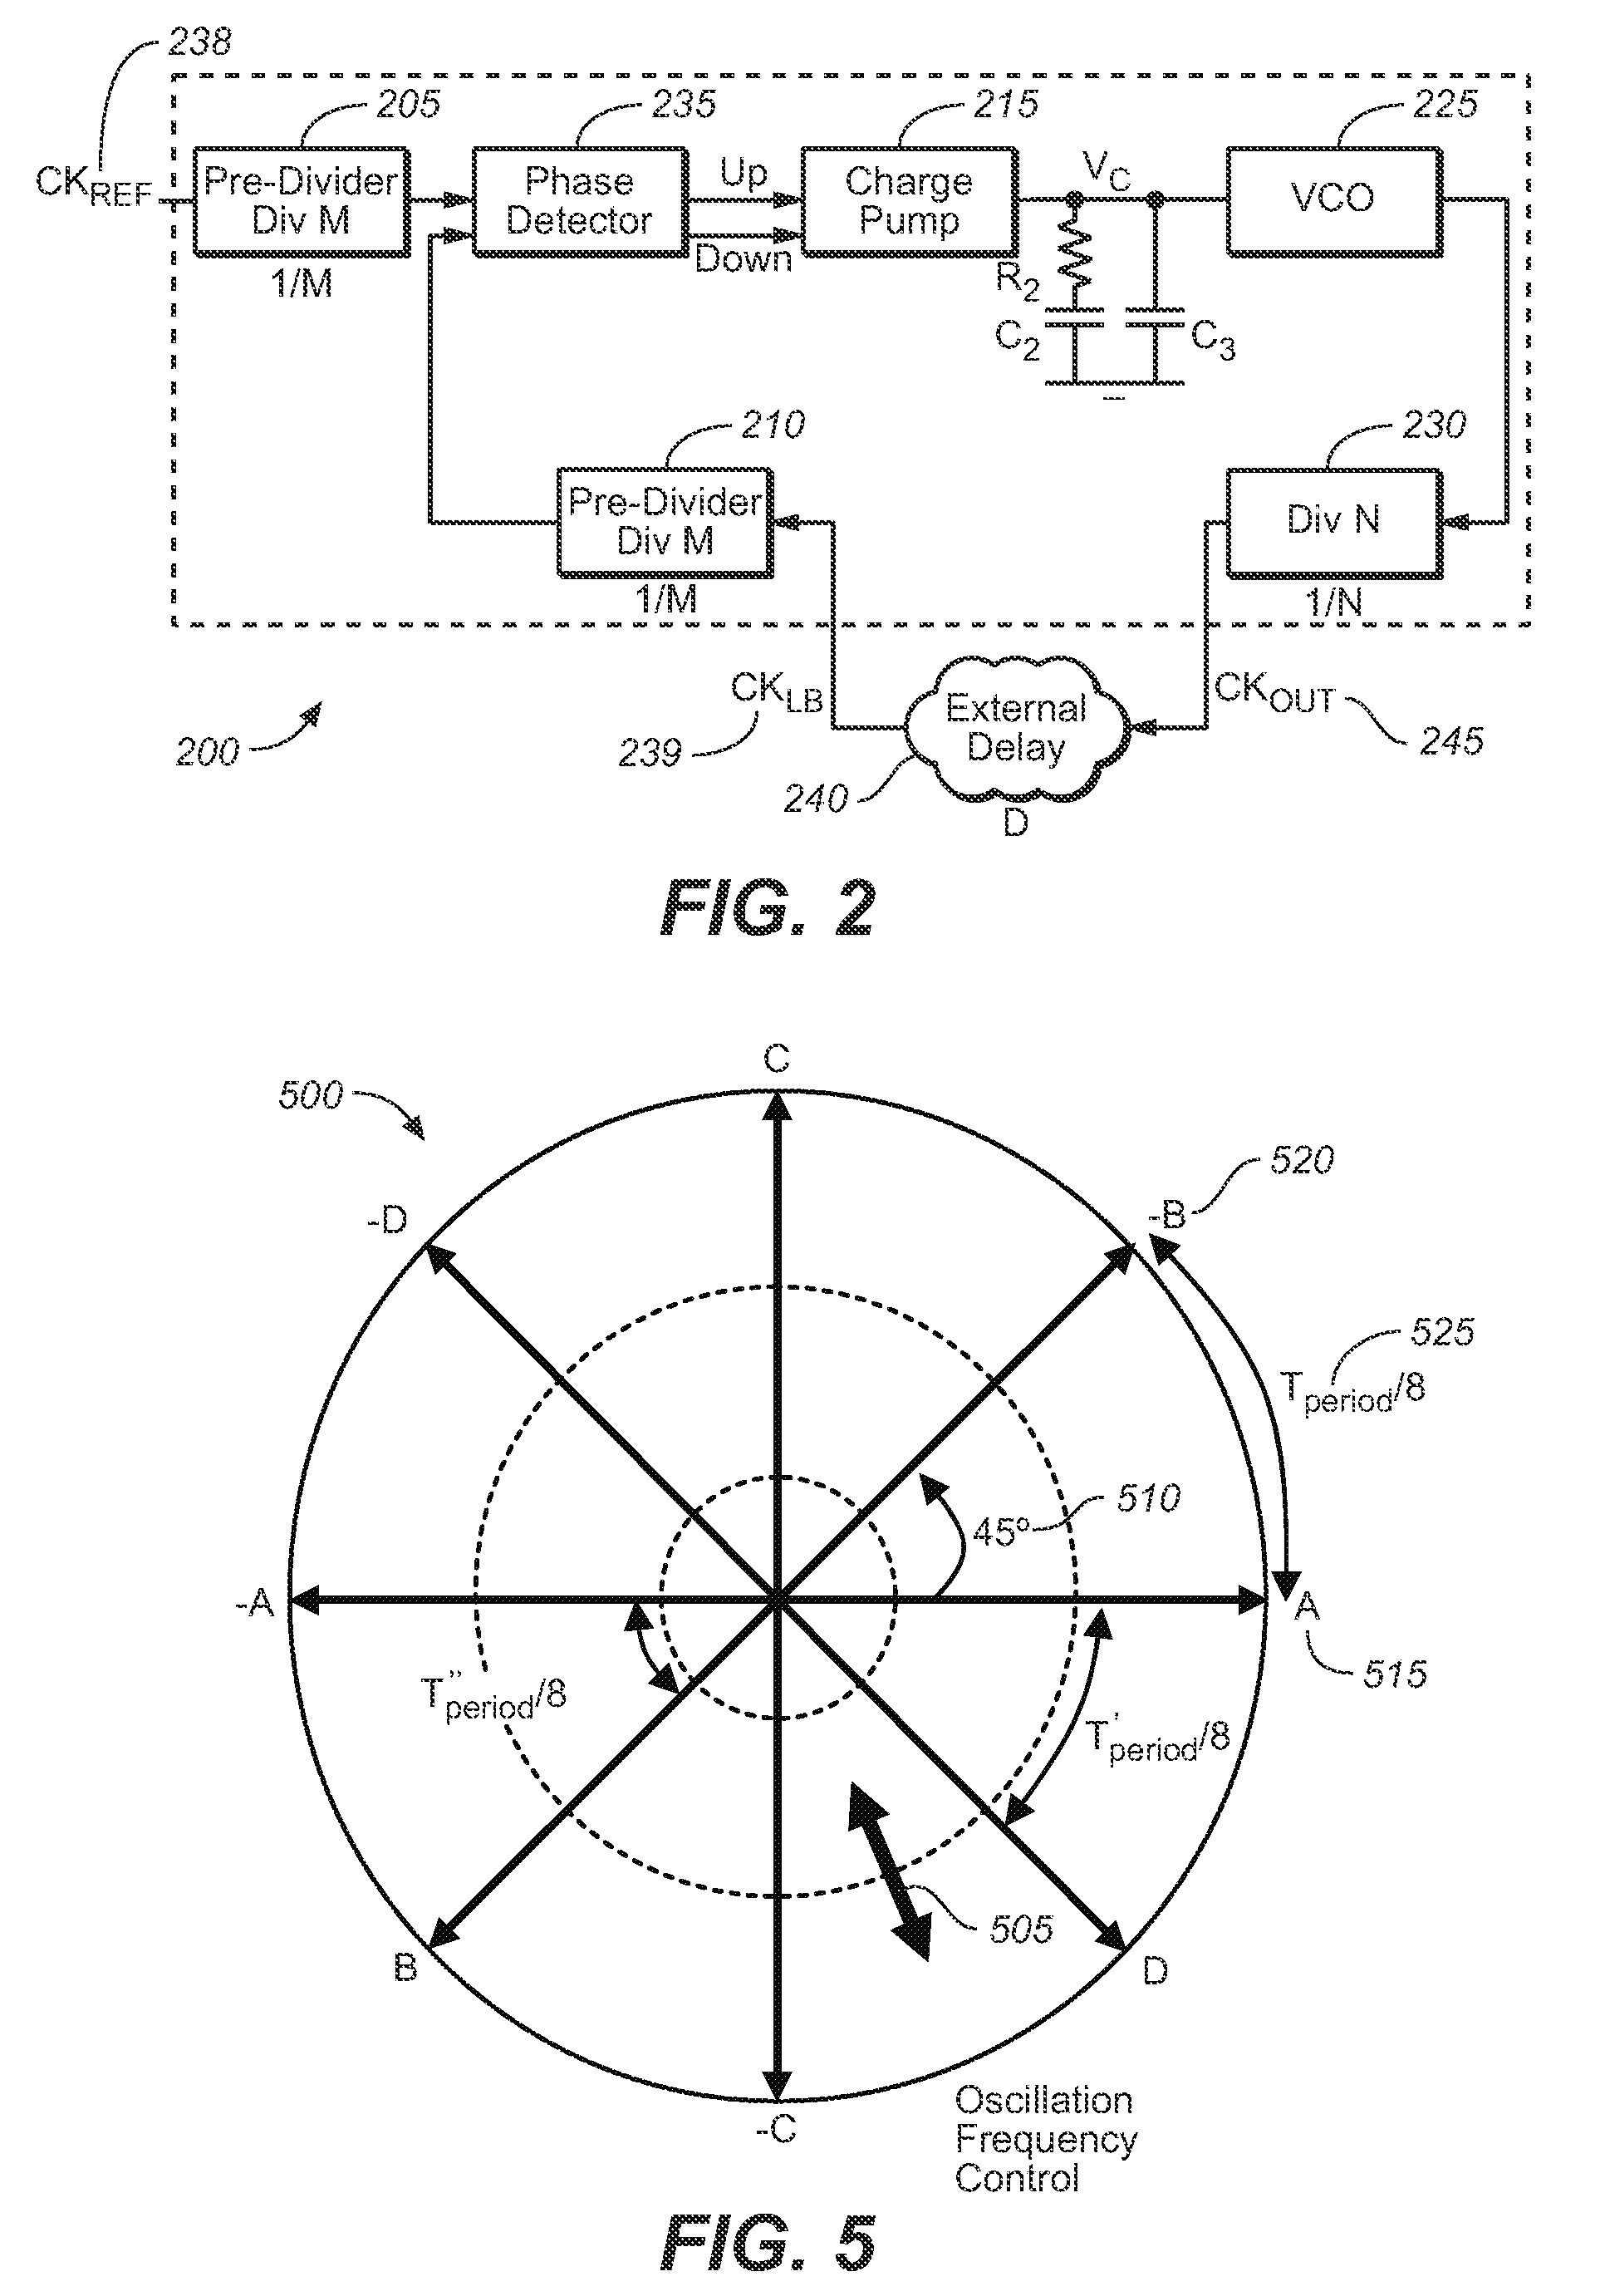 System and method for phase-locked loop (PLL) for high-speed memory interface (HSMI)